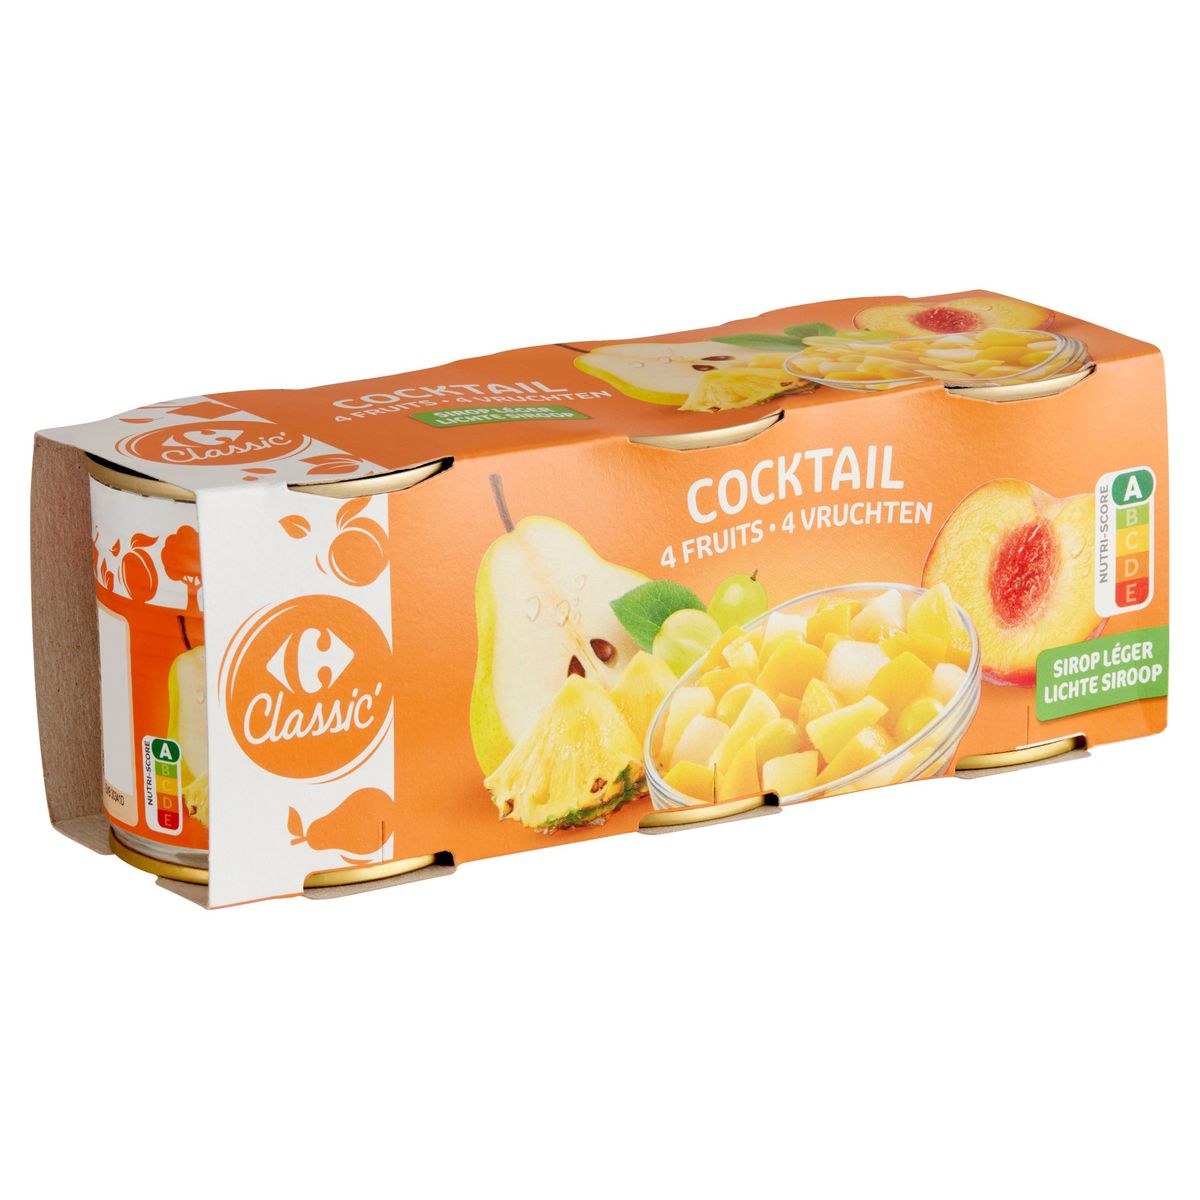 Carrefour Classic' Cocktail 4 Fruits 3 x 212 g